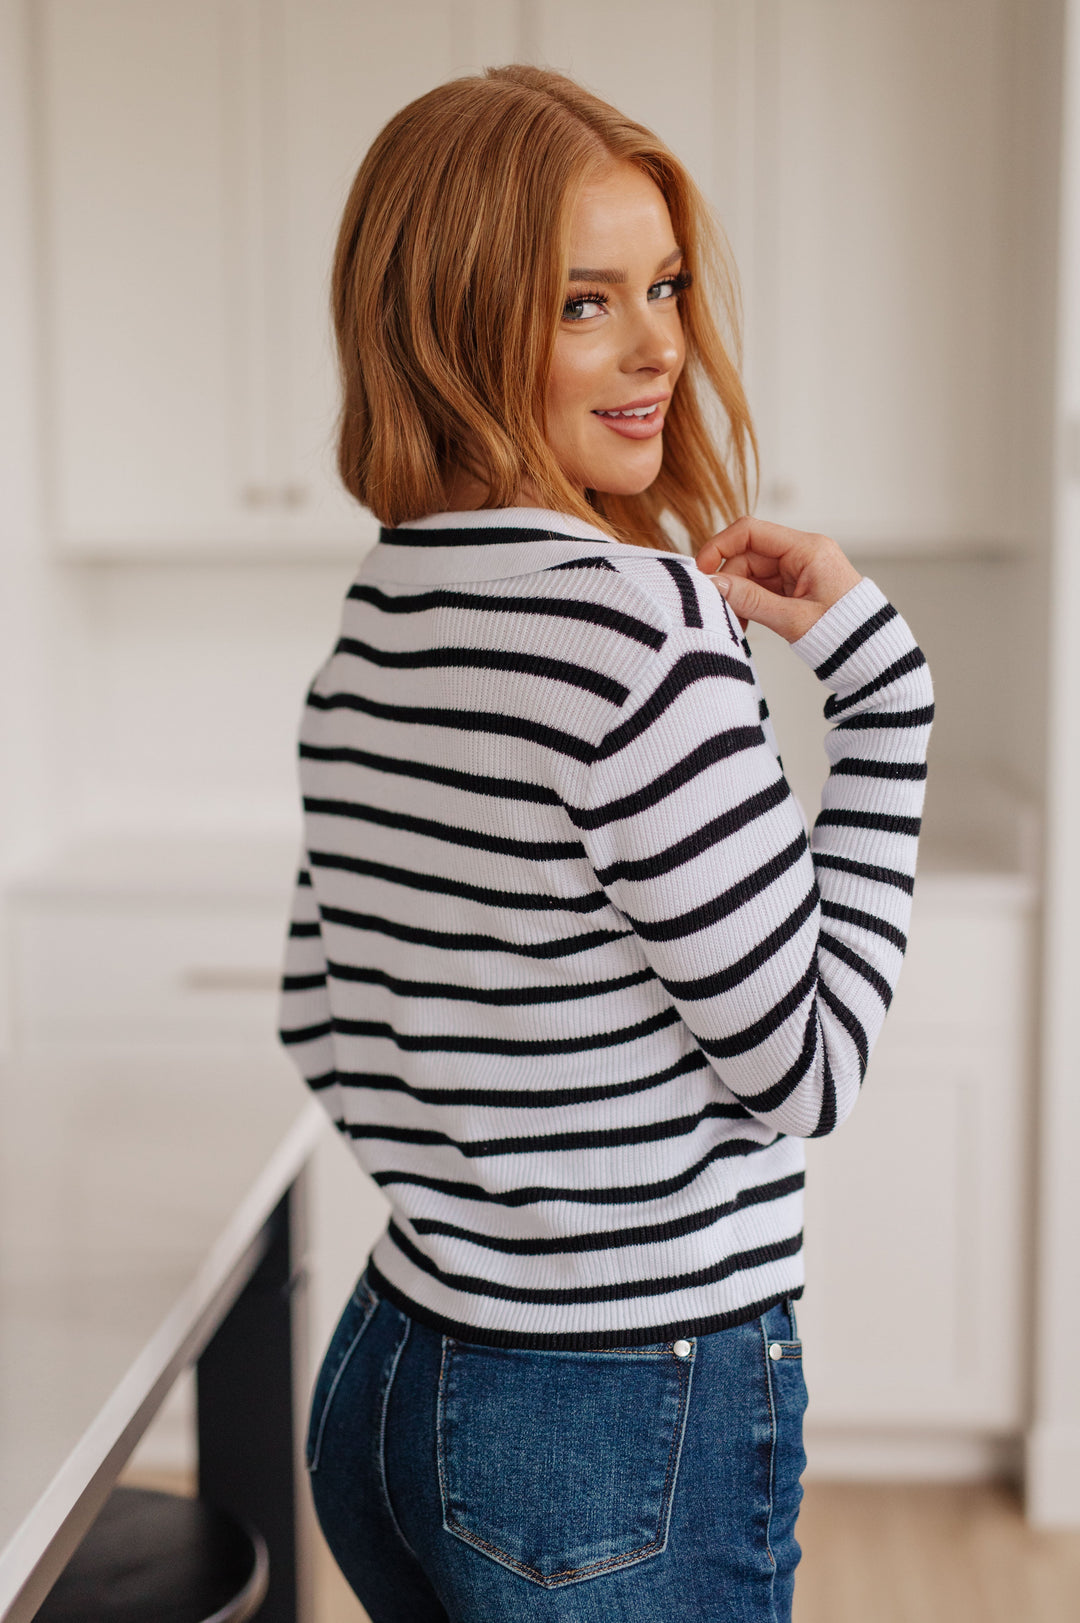 Self Improvement V-Neck Striped Sweater-Sweaters/Sweatshirts-Inspired by Justeen-Women's Clothing Boutique in Chicago, Illinois